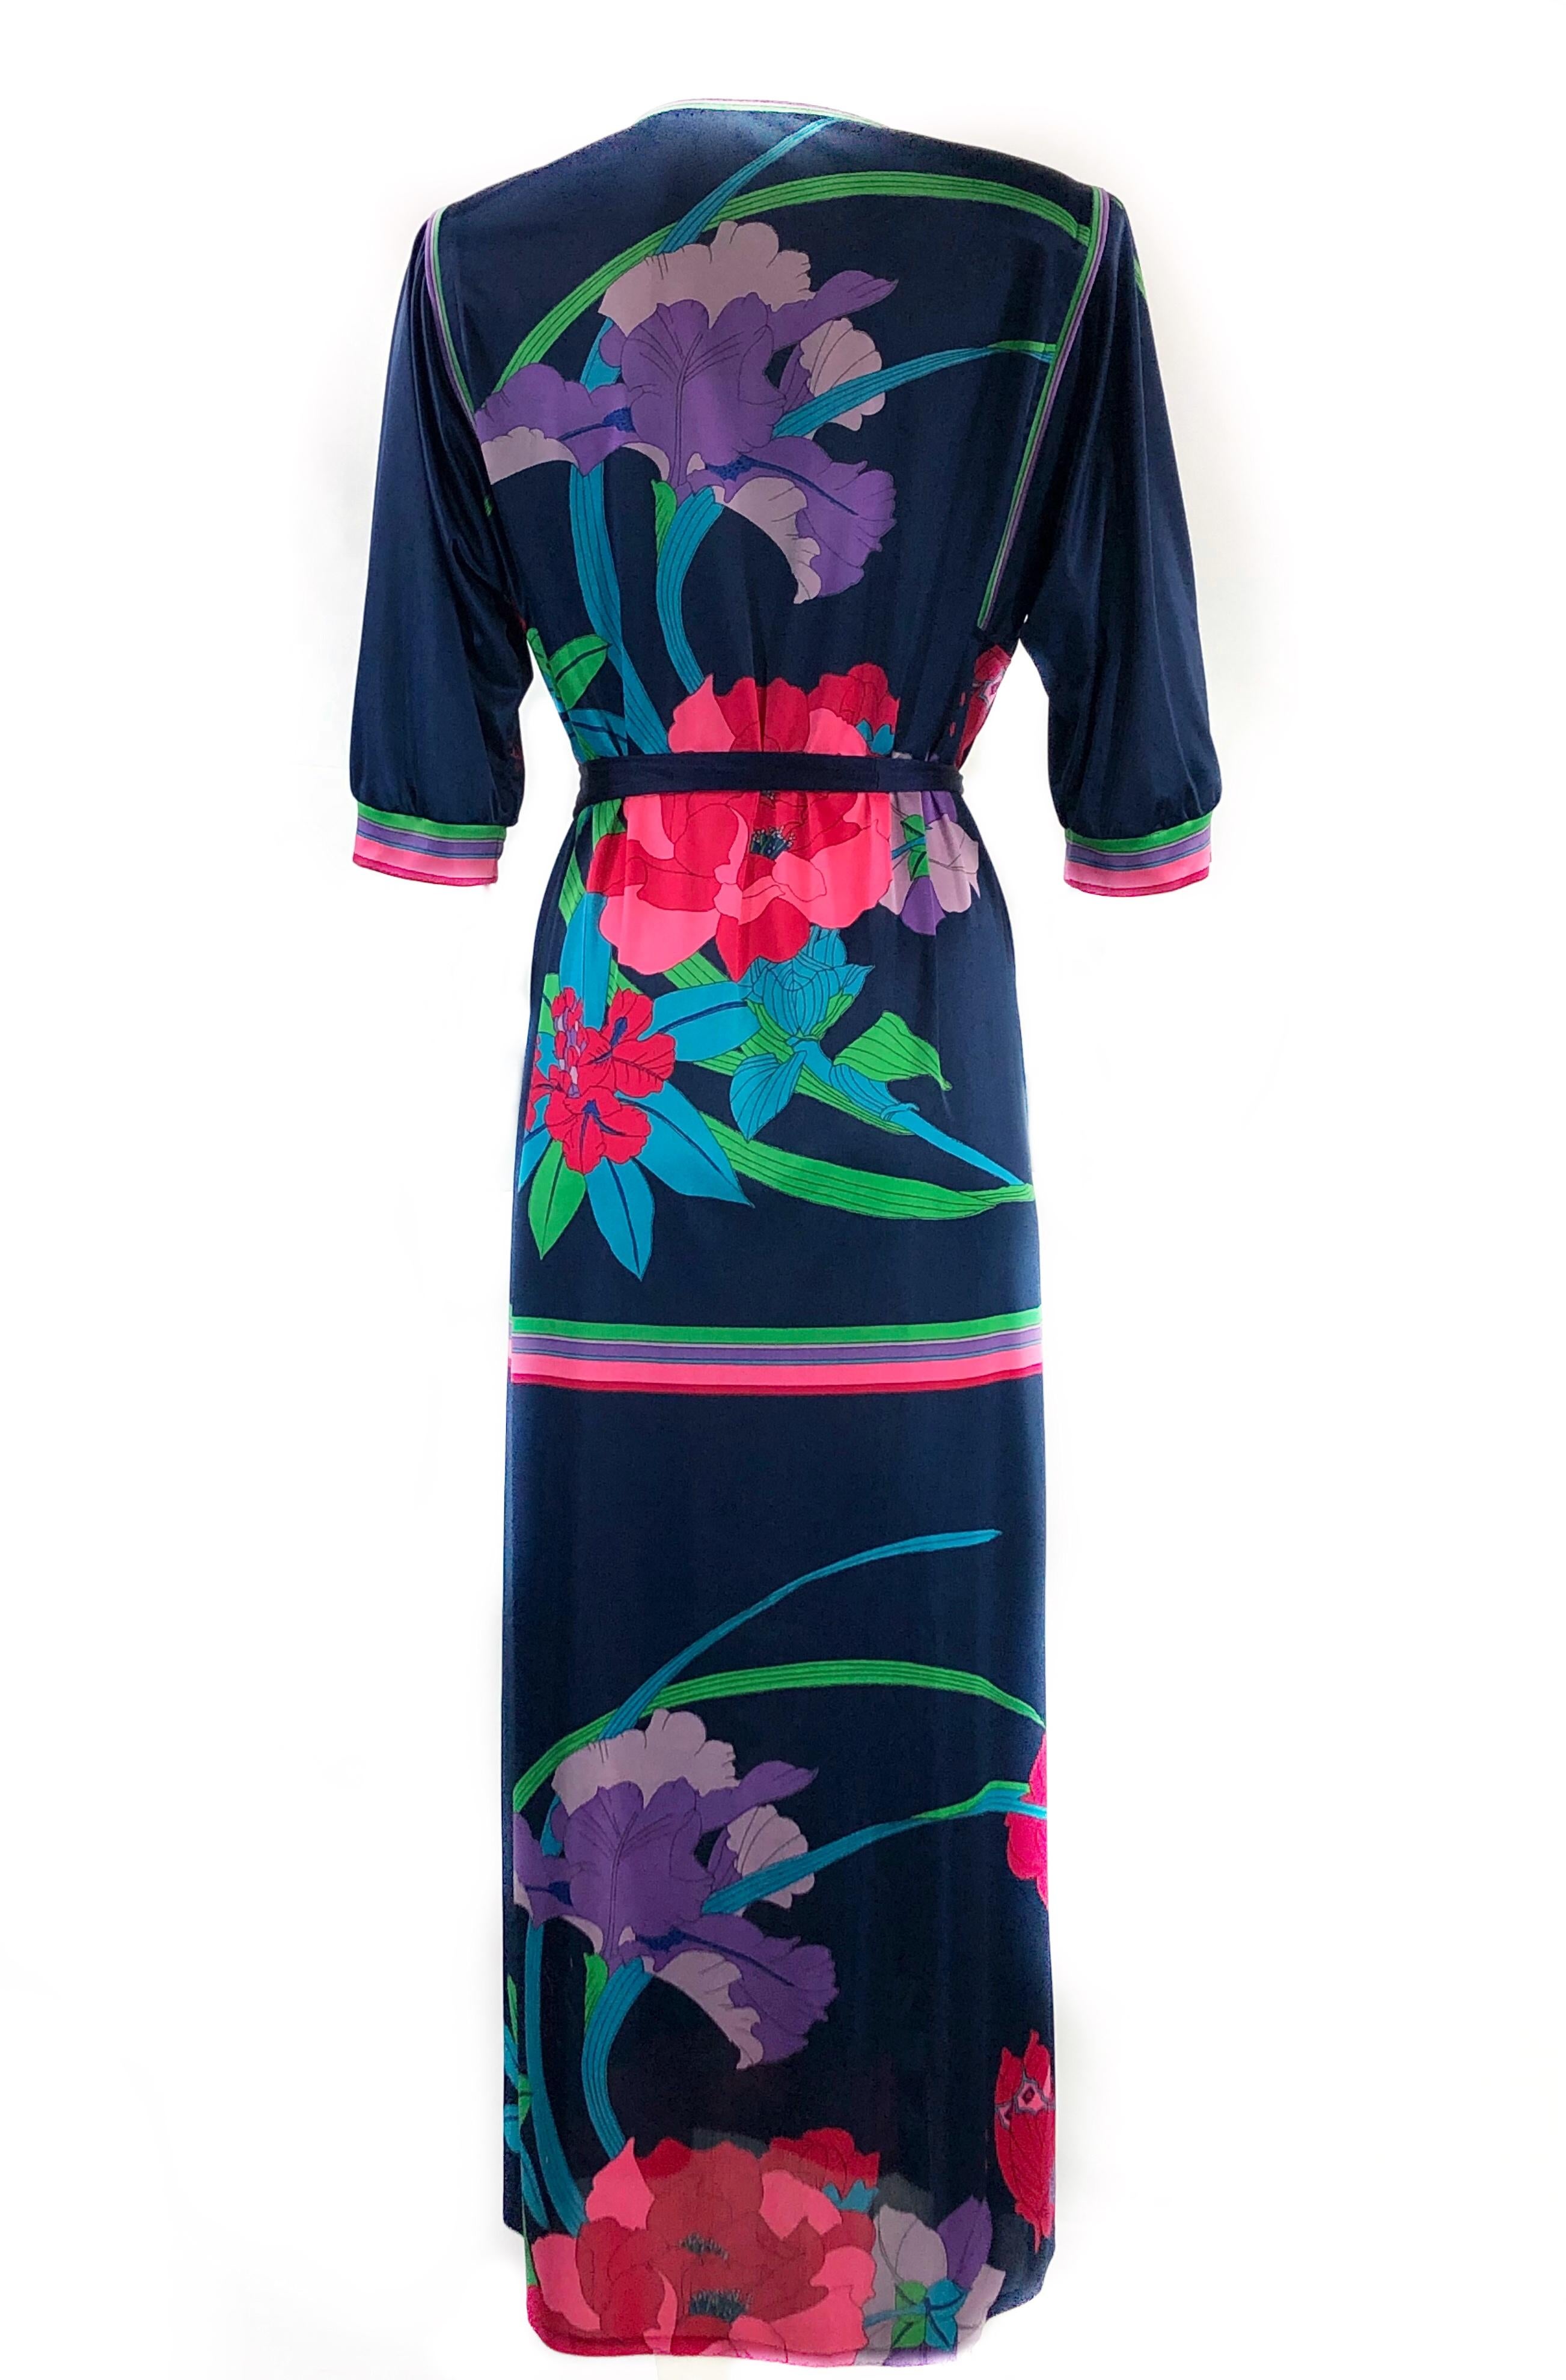 Vintage LEONARD Dark Blue/ Navy Floral 3/4 Sleeve Belted Maxi Dress

Product details:
Tags are missing
Pink Leonard sign on the bottom of the right sleeve
¾ sleeves 17” long
Belt measures 65” long and 2.5” wide 
Made in France
